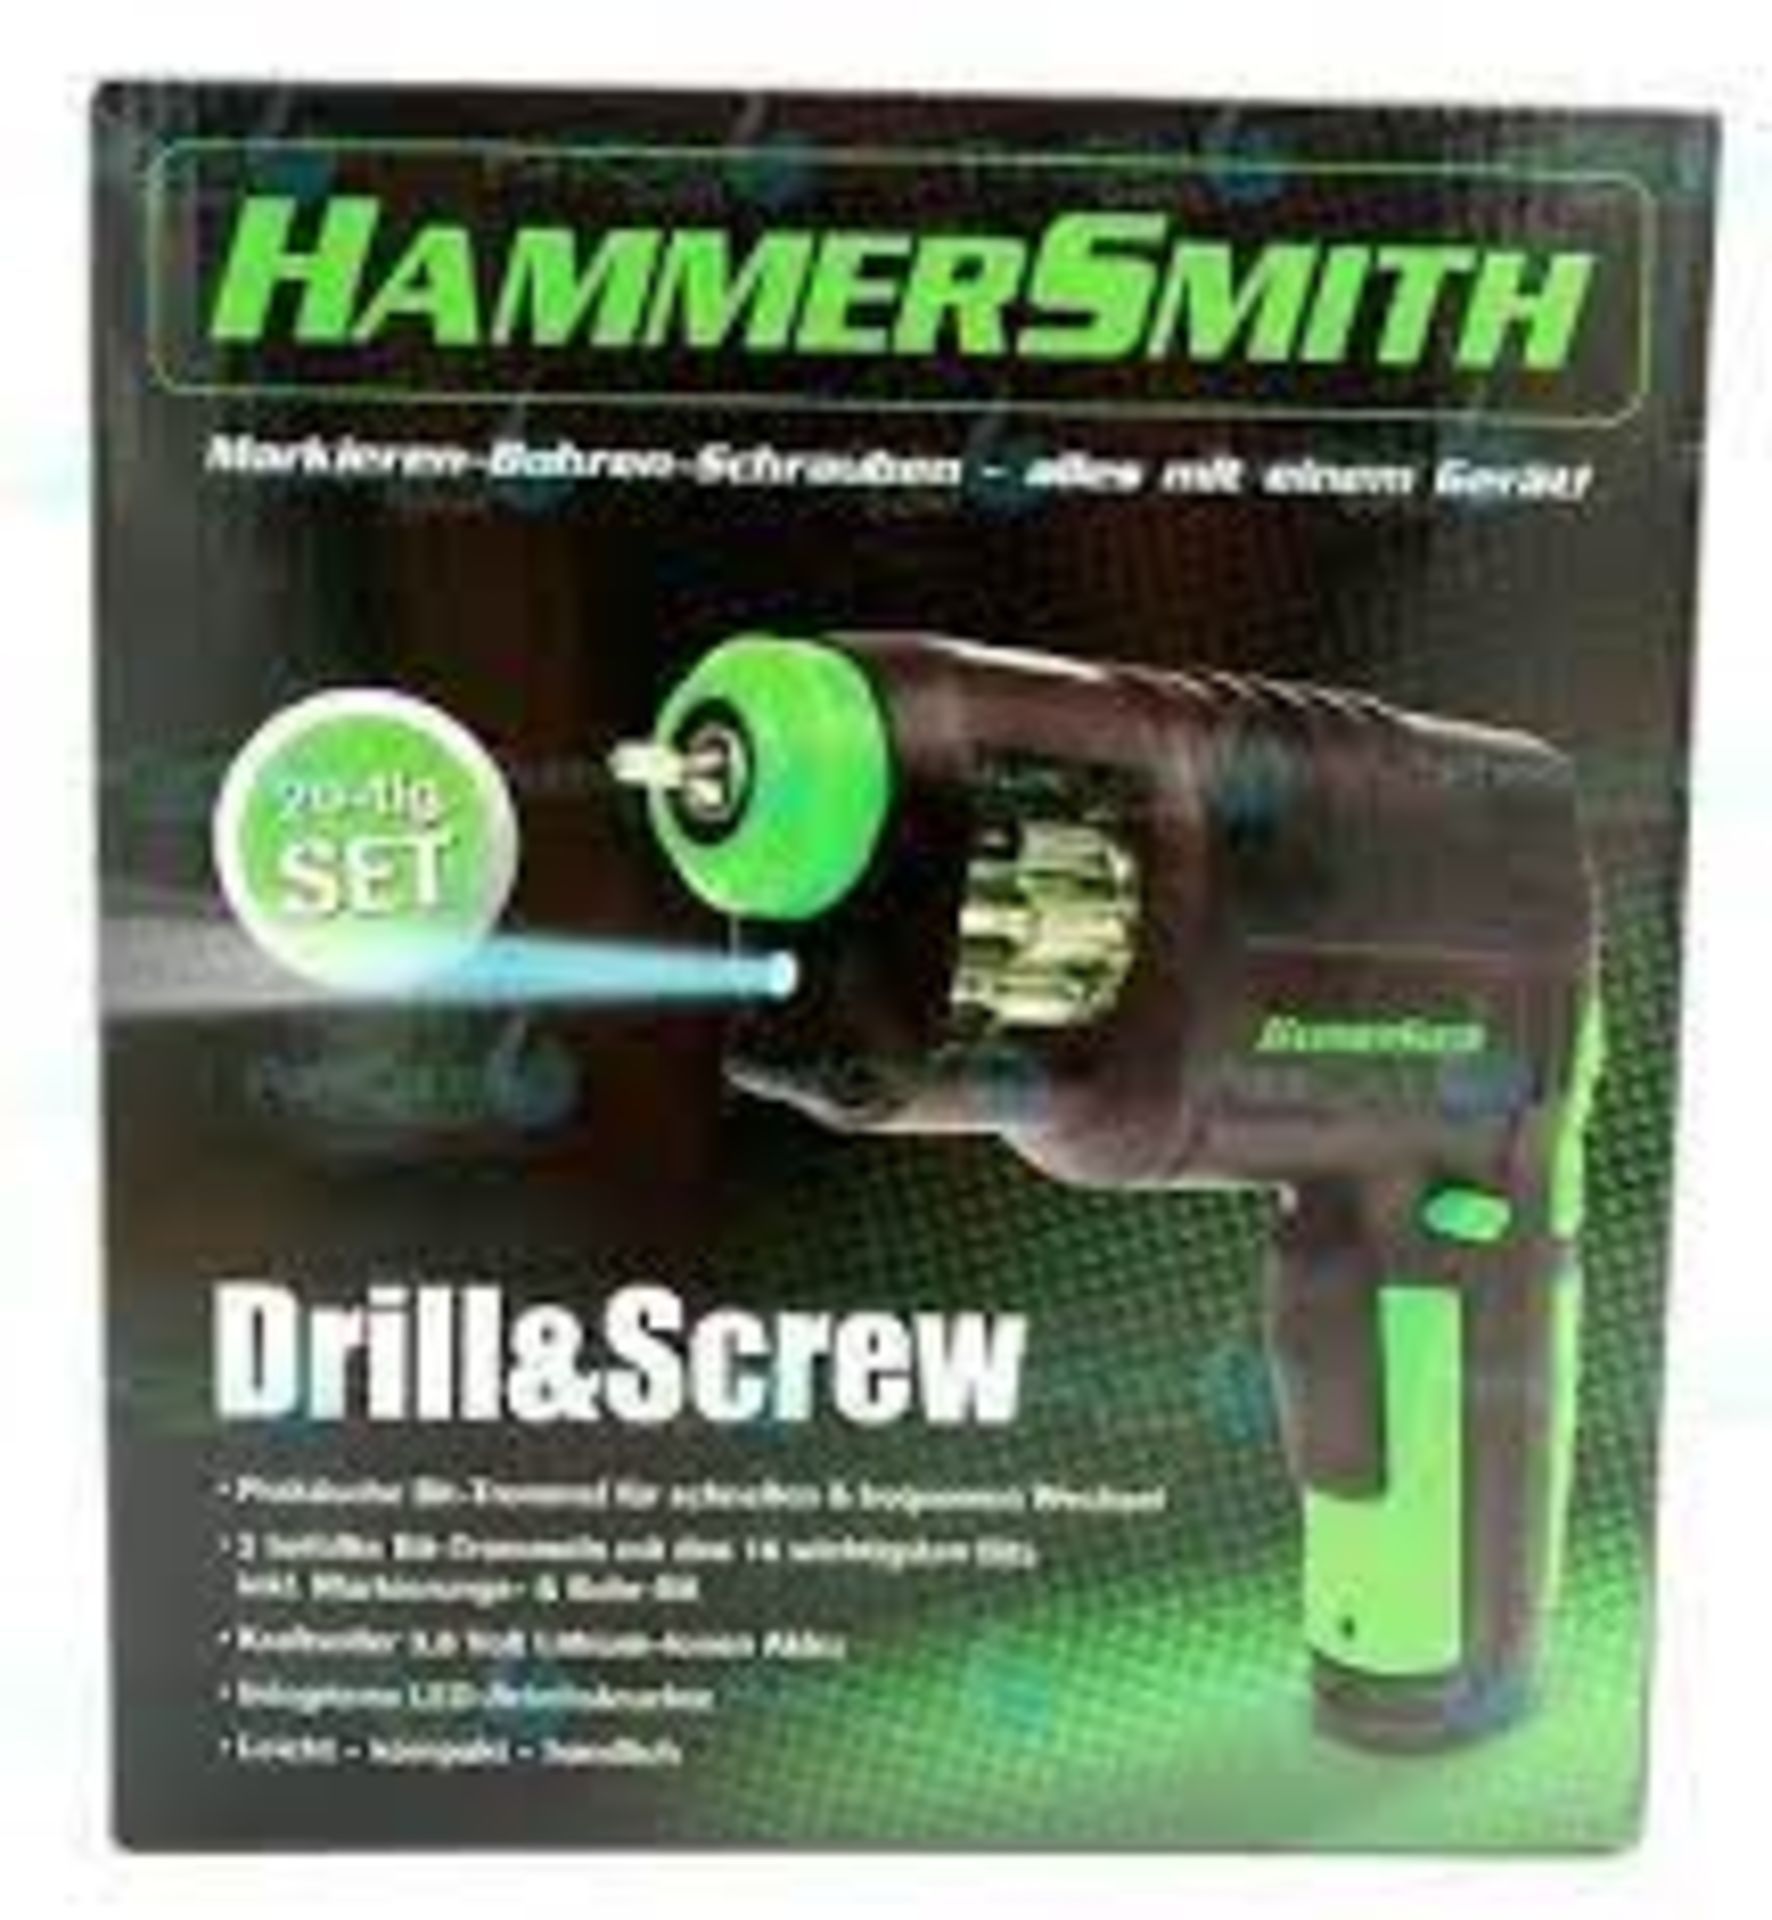 3 X BRAND NEW HAMMERSITH MARKING, DRILLING SCREWING 20 PIECE SETS R7-1